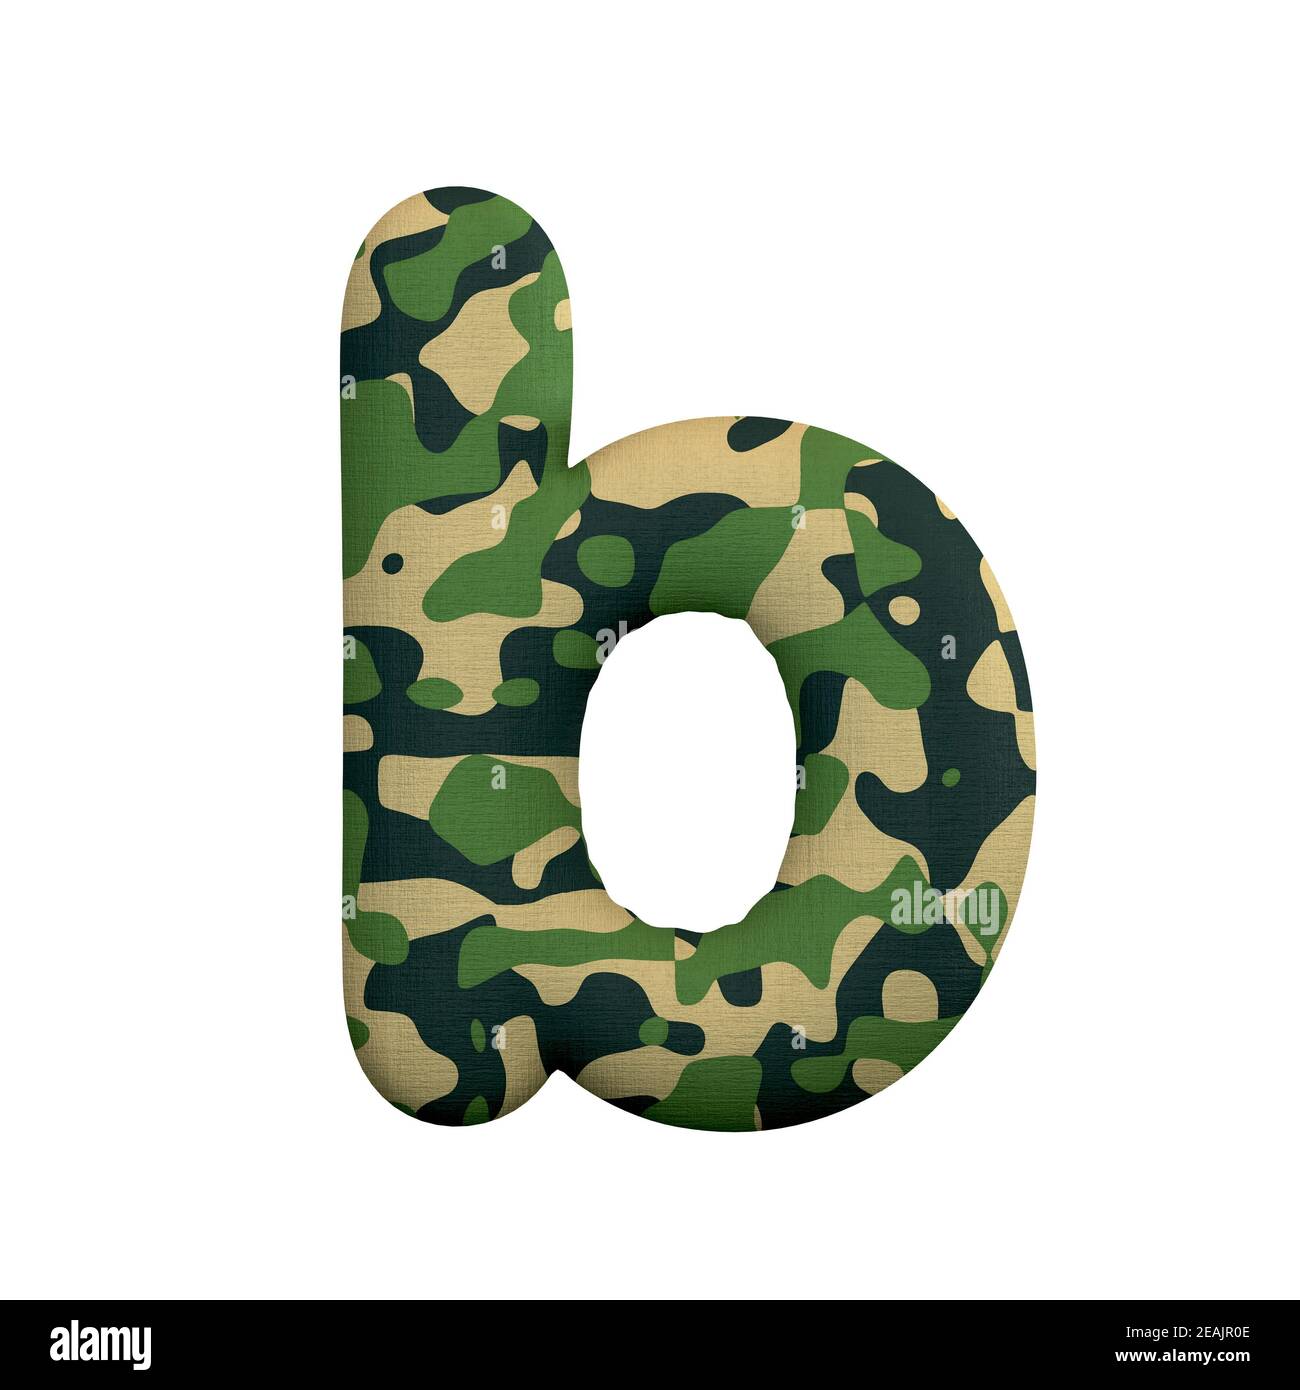 Army letter B - Lower-case 3d Camo font - Suitable for Army, war or survivalism related subjects Stock Photo